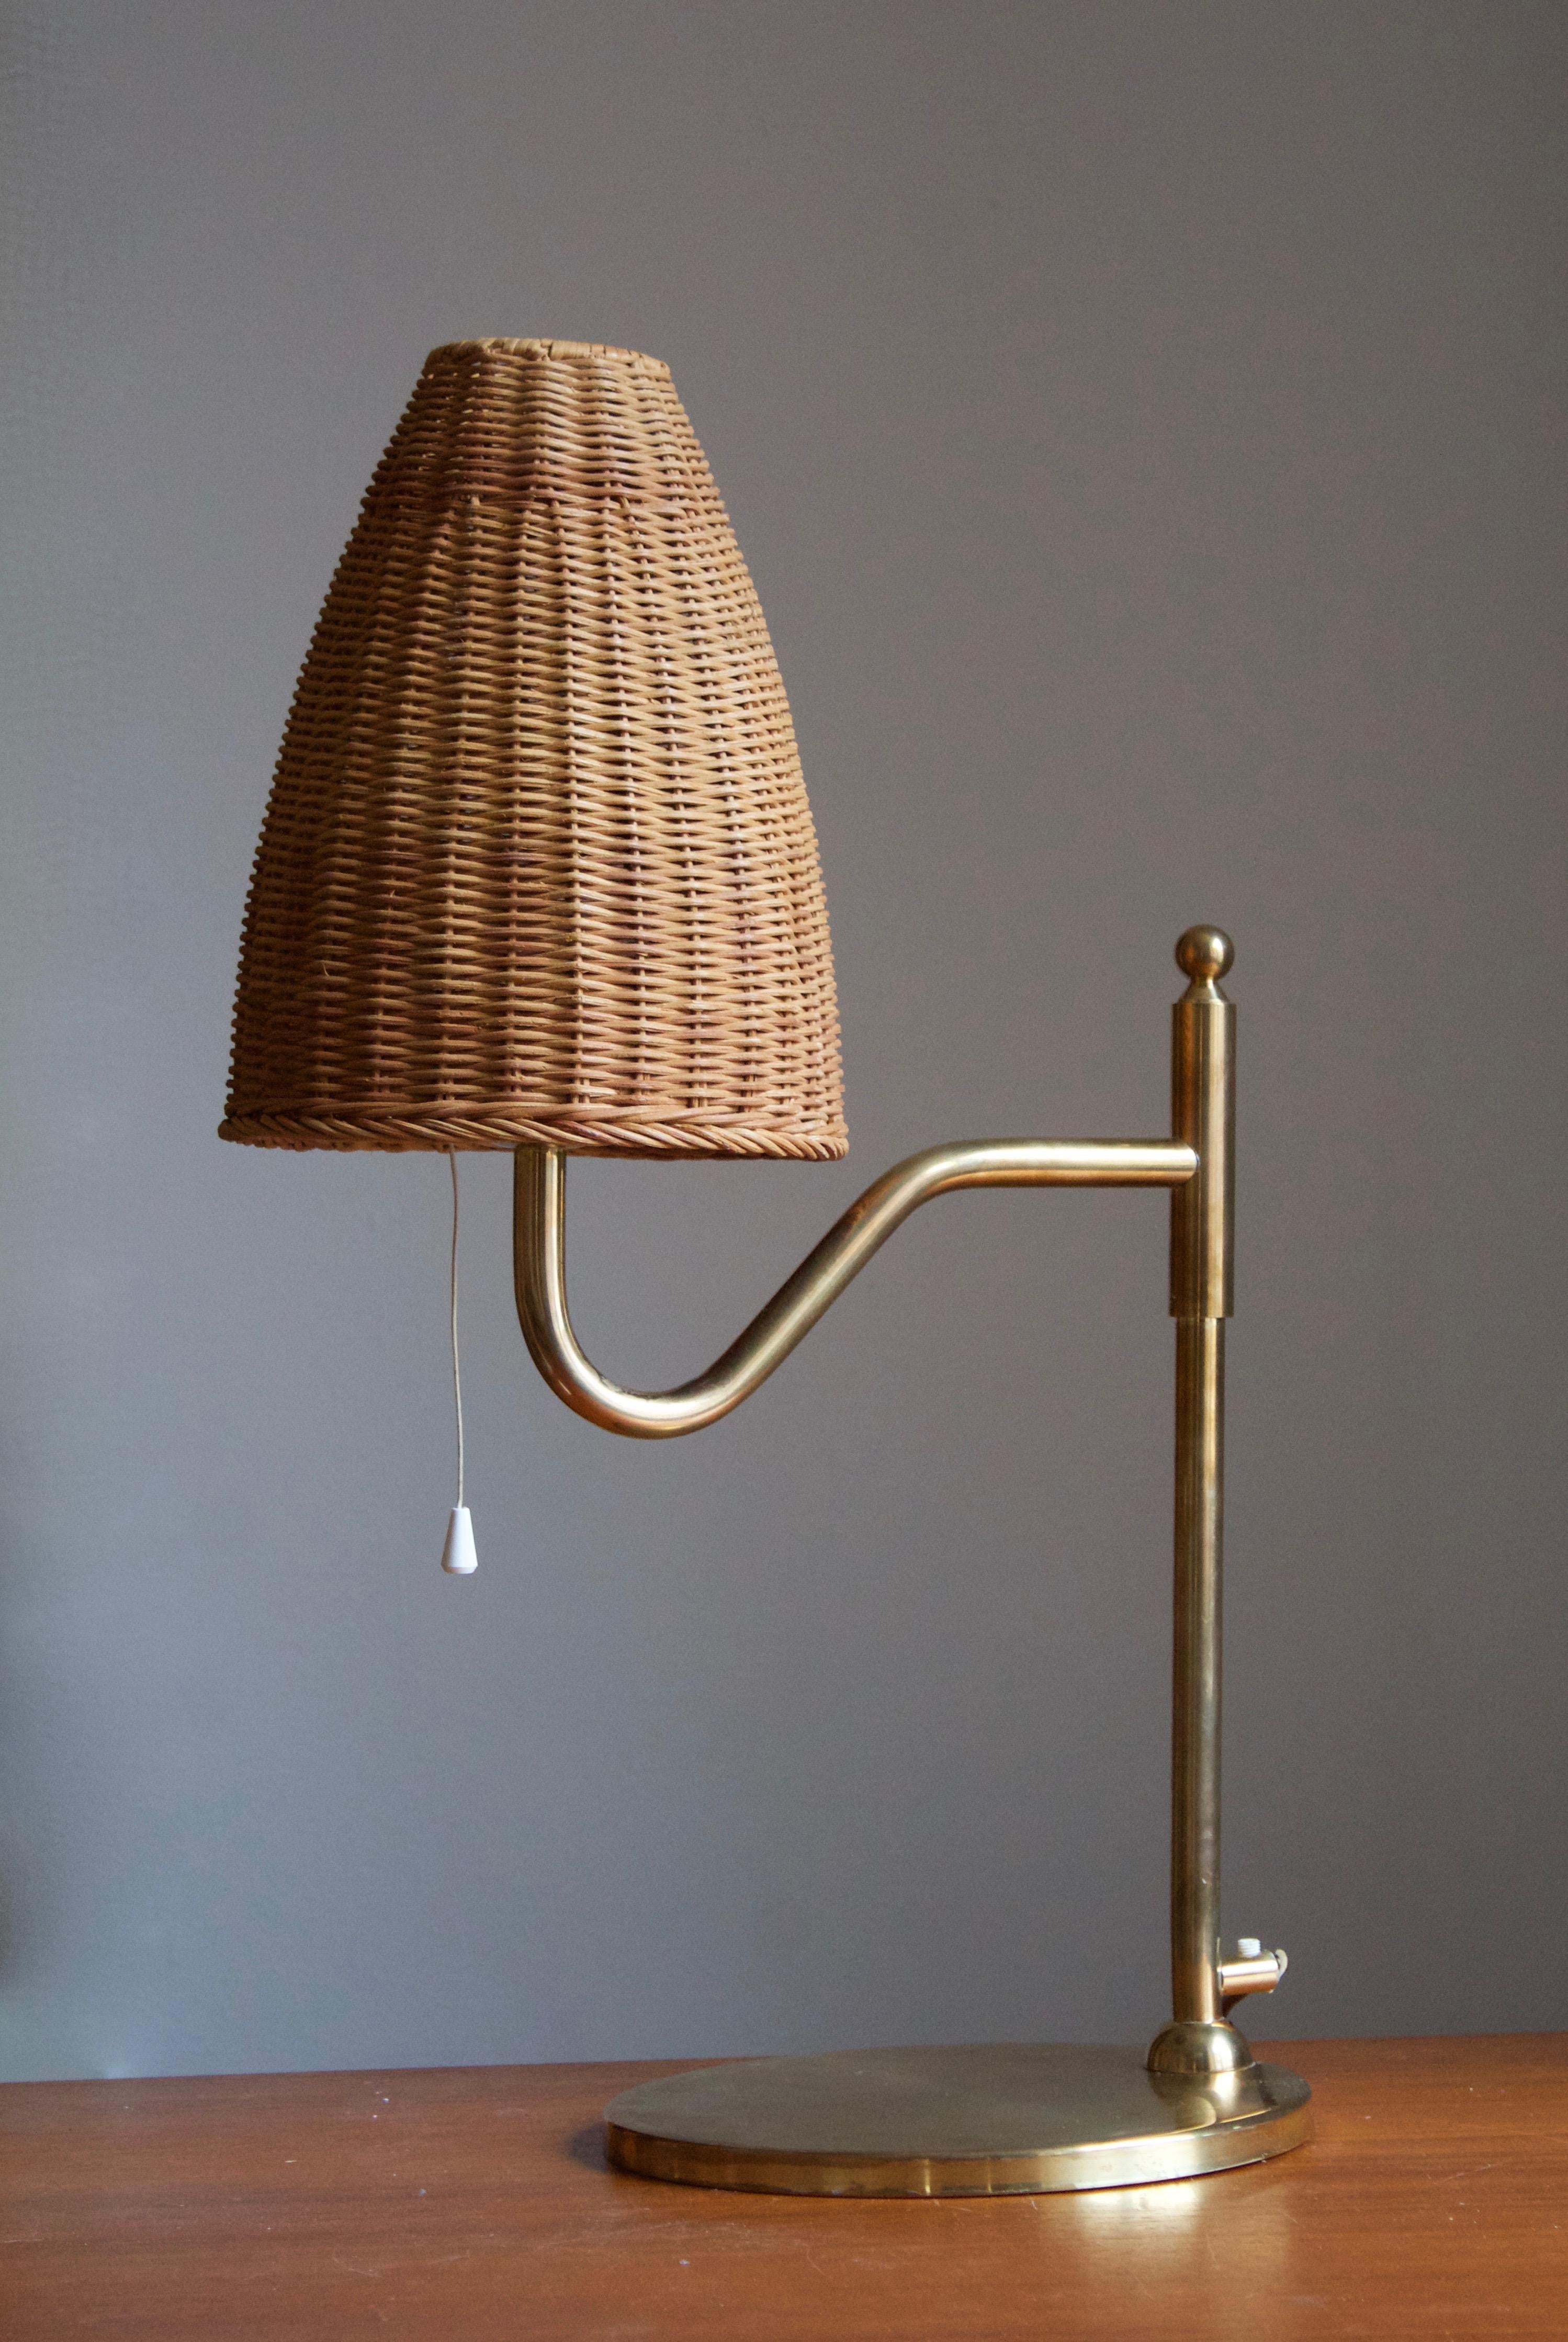 A table lamp produced in Sweden, c. 1960s.

Sold without lampshade. stated dimensions excluding lampshade, height includes socket. 

Other designers of the period include Paavo Tynell, Hans Agne Jacobsen, Josef Frank, and Serge Mouille.
  